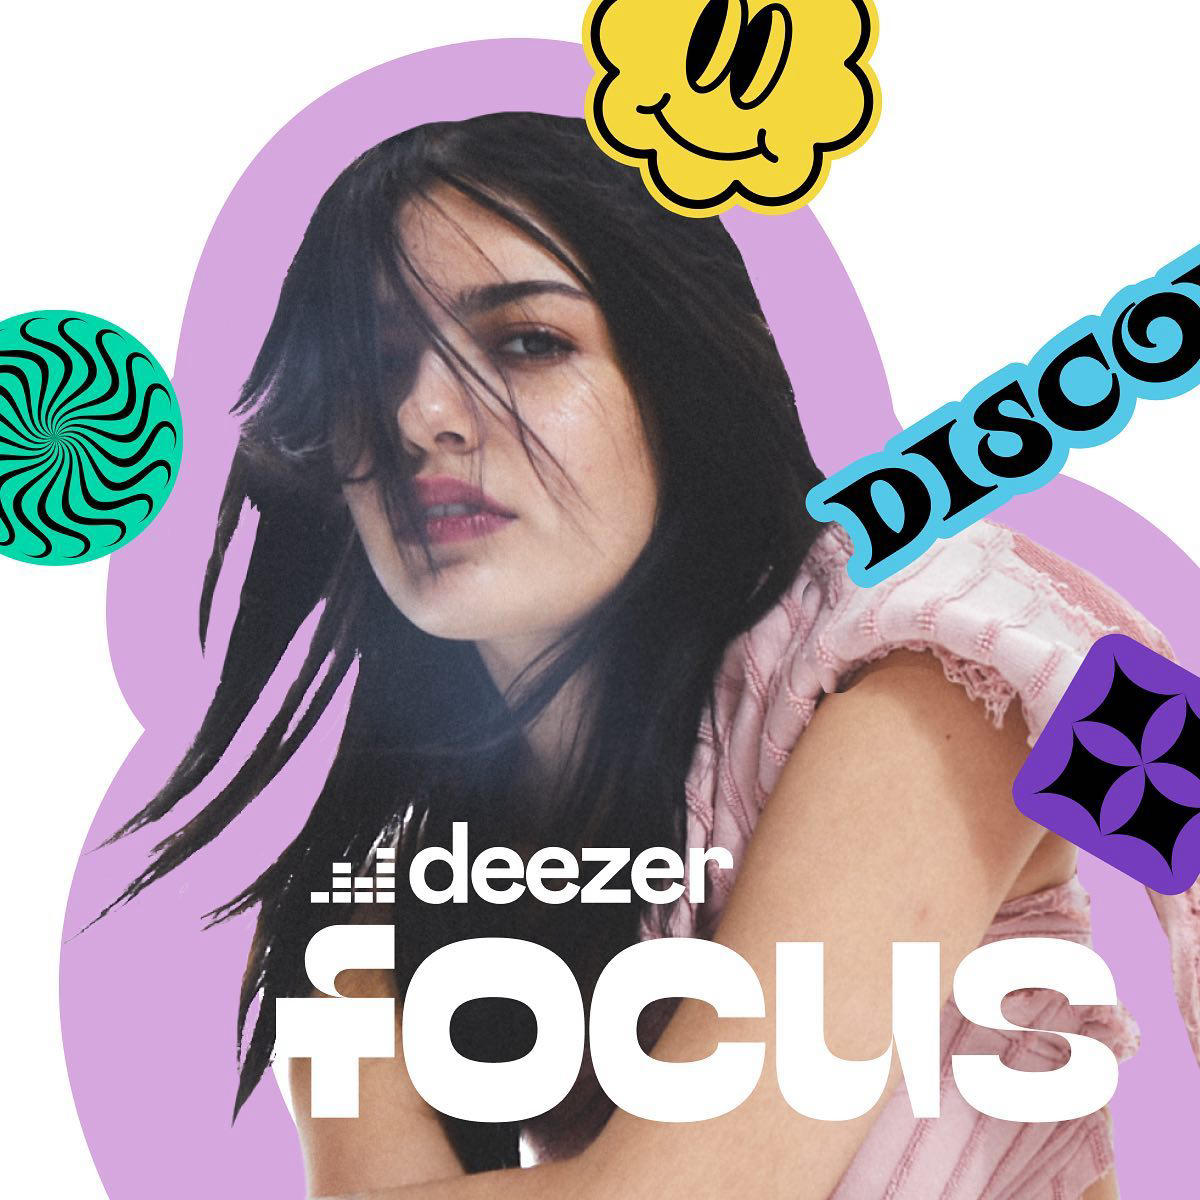 image  1 So excited to announce the talented yunè pinku as our Deezer Focus artist for April